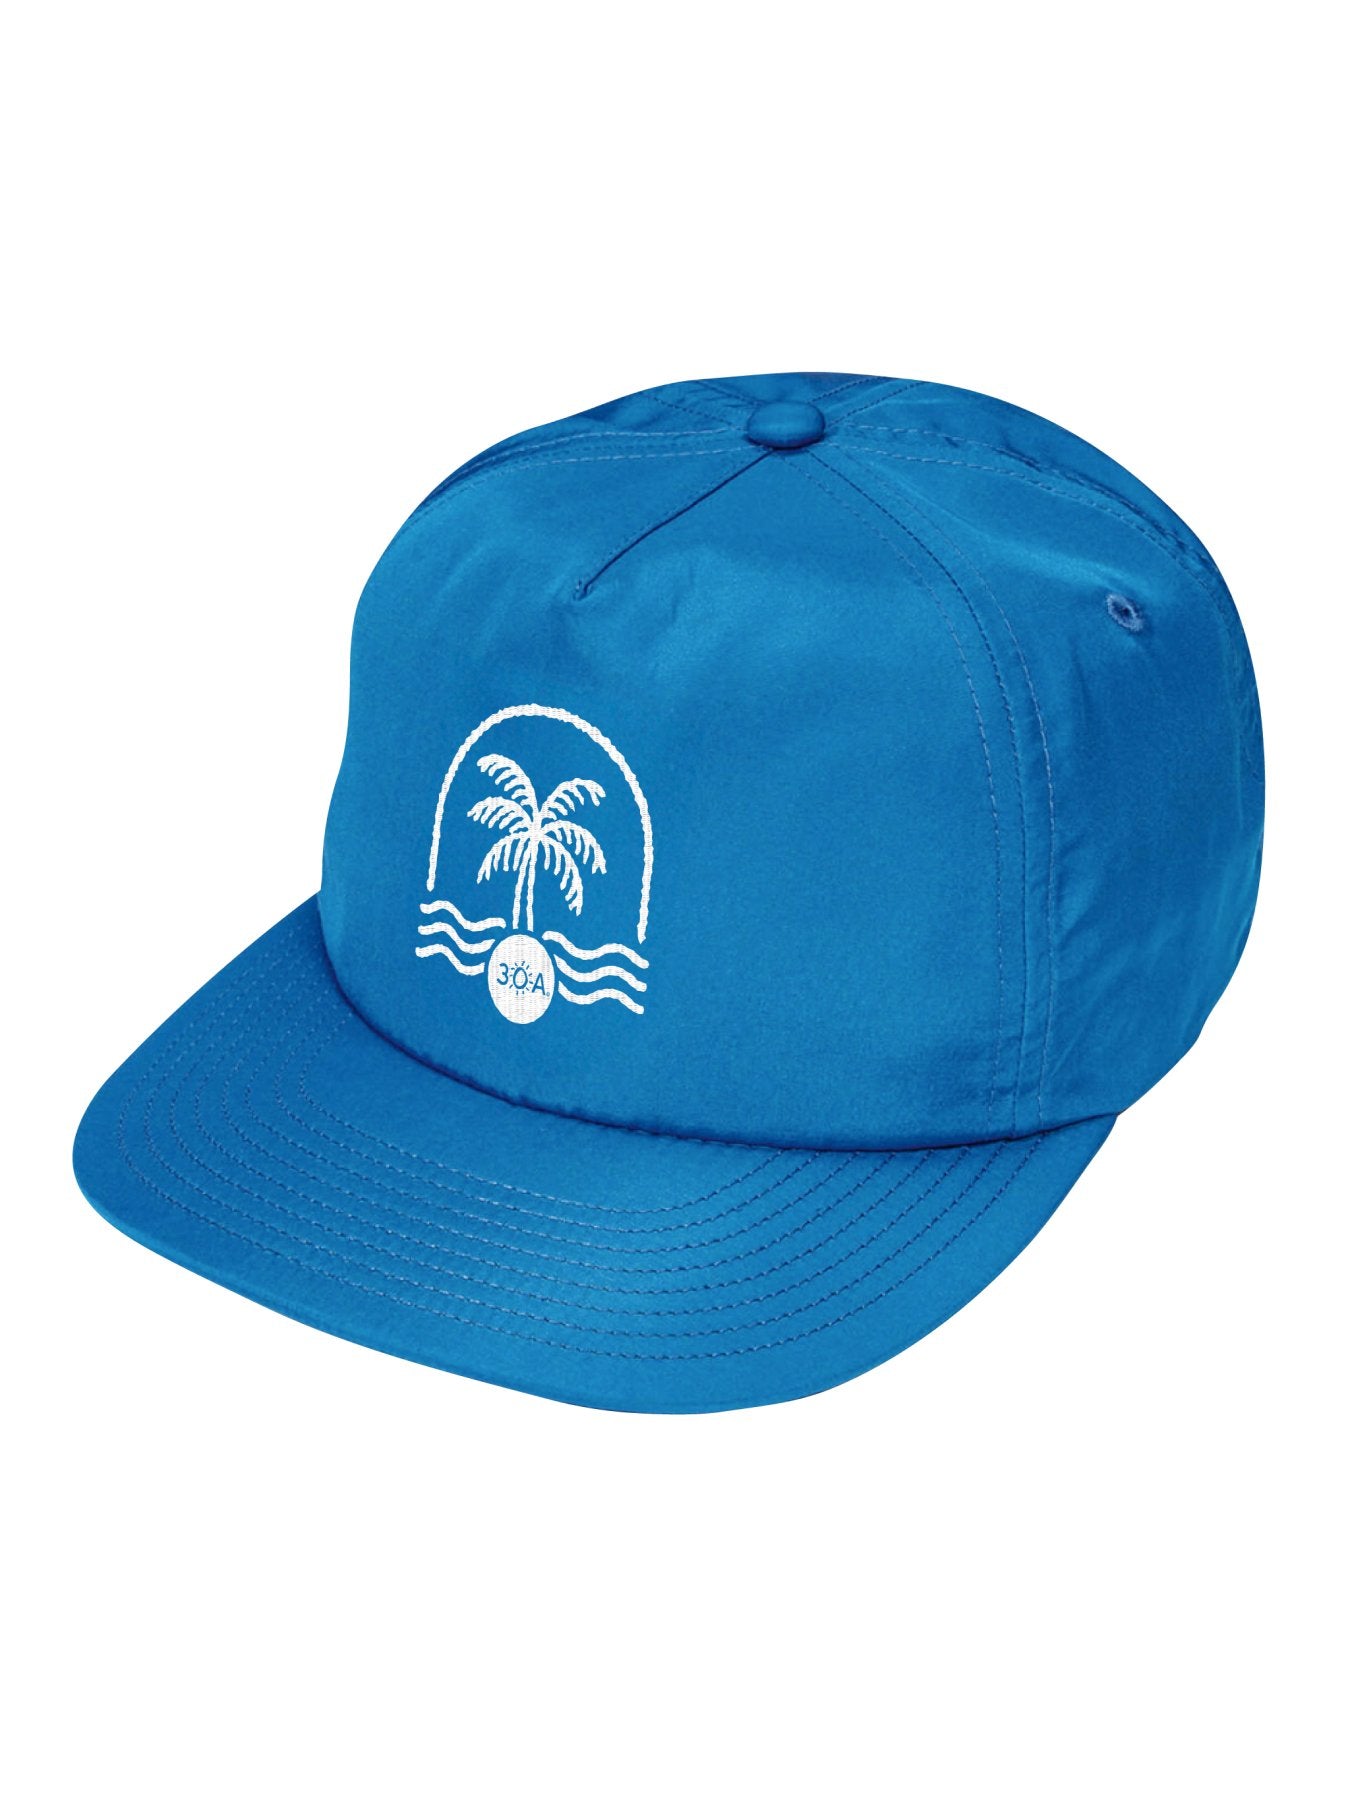 30A Electric Waves Hat - 30A Gear - caps adjustable